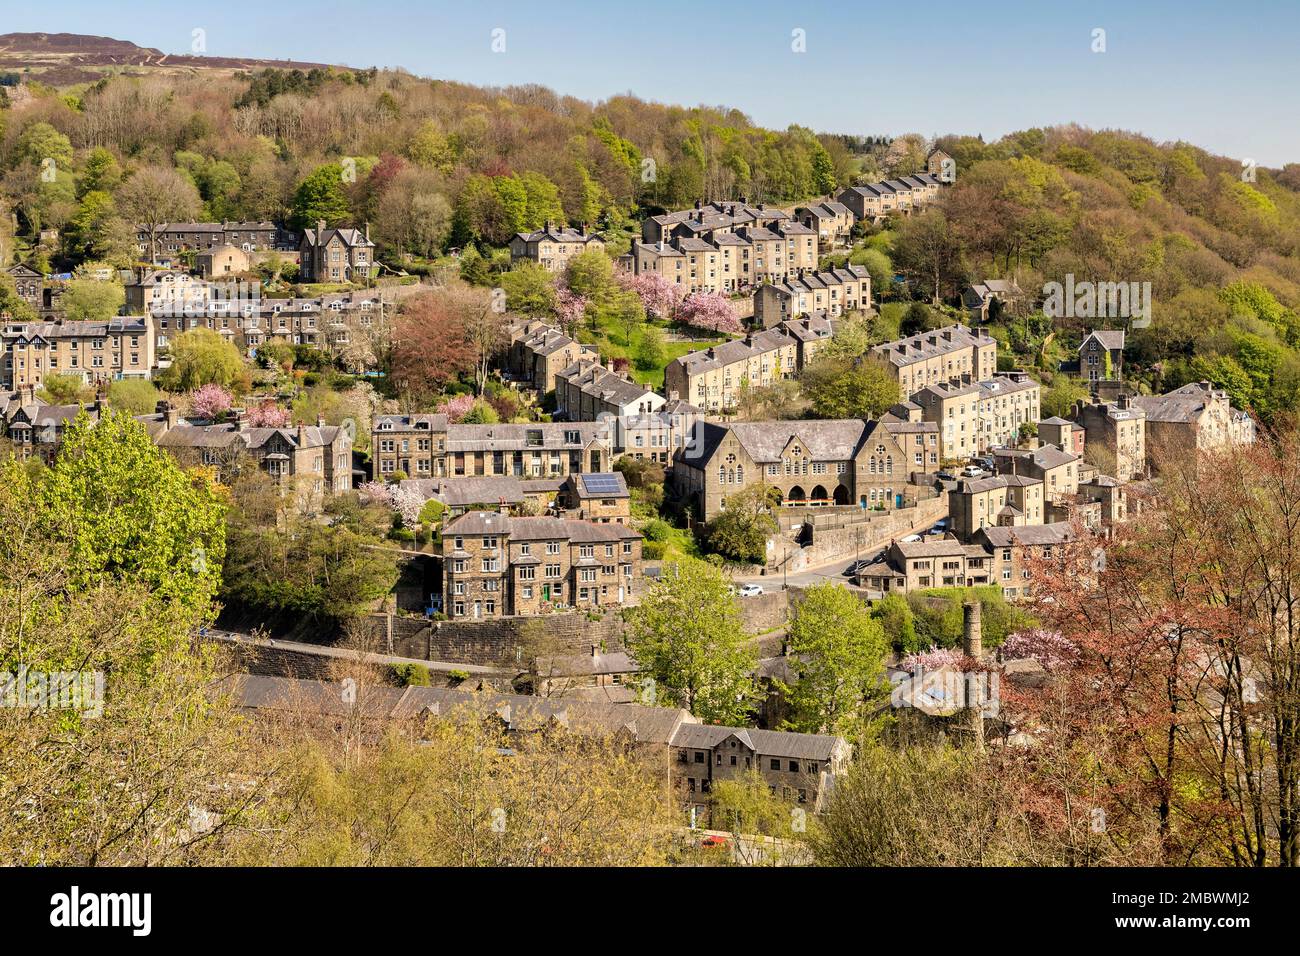 29 April 2022: Hebden Bridge, West Yorkshire, UK - Sunny day in spring, with a view over the terraced houses of the beautiful old mill town. Lush and Stock Photo